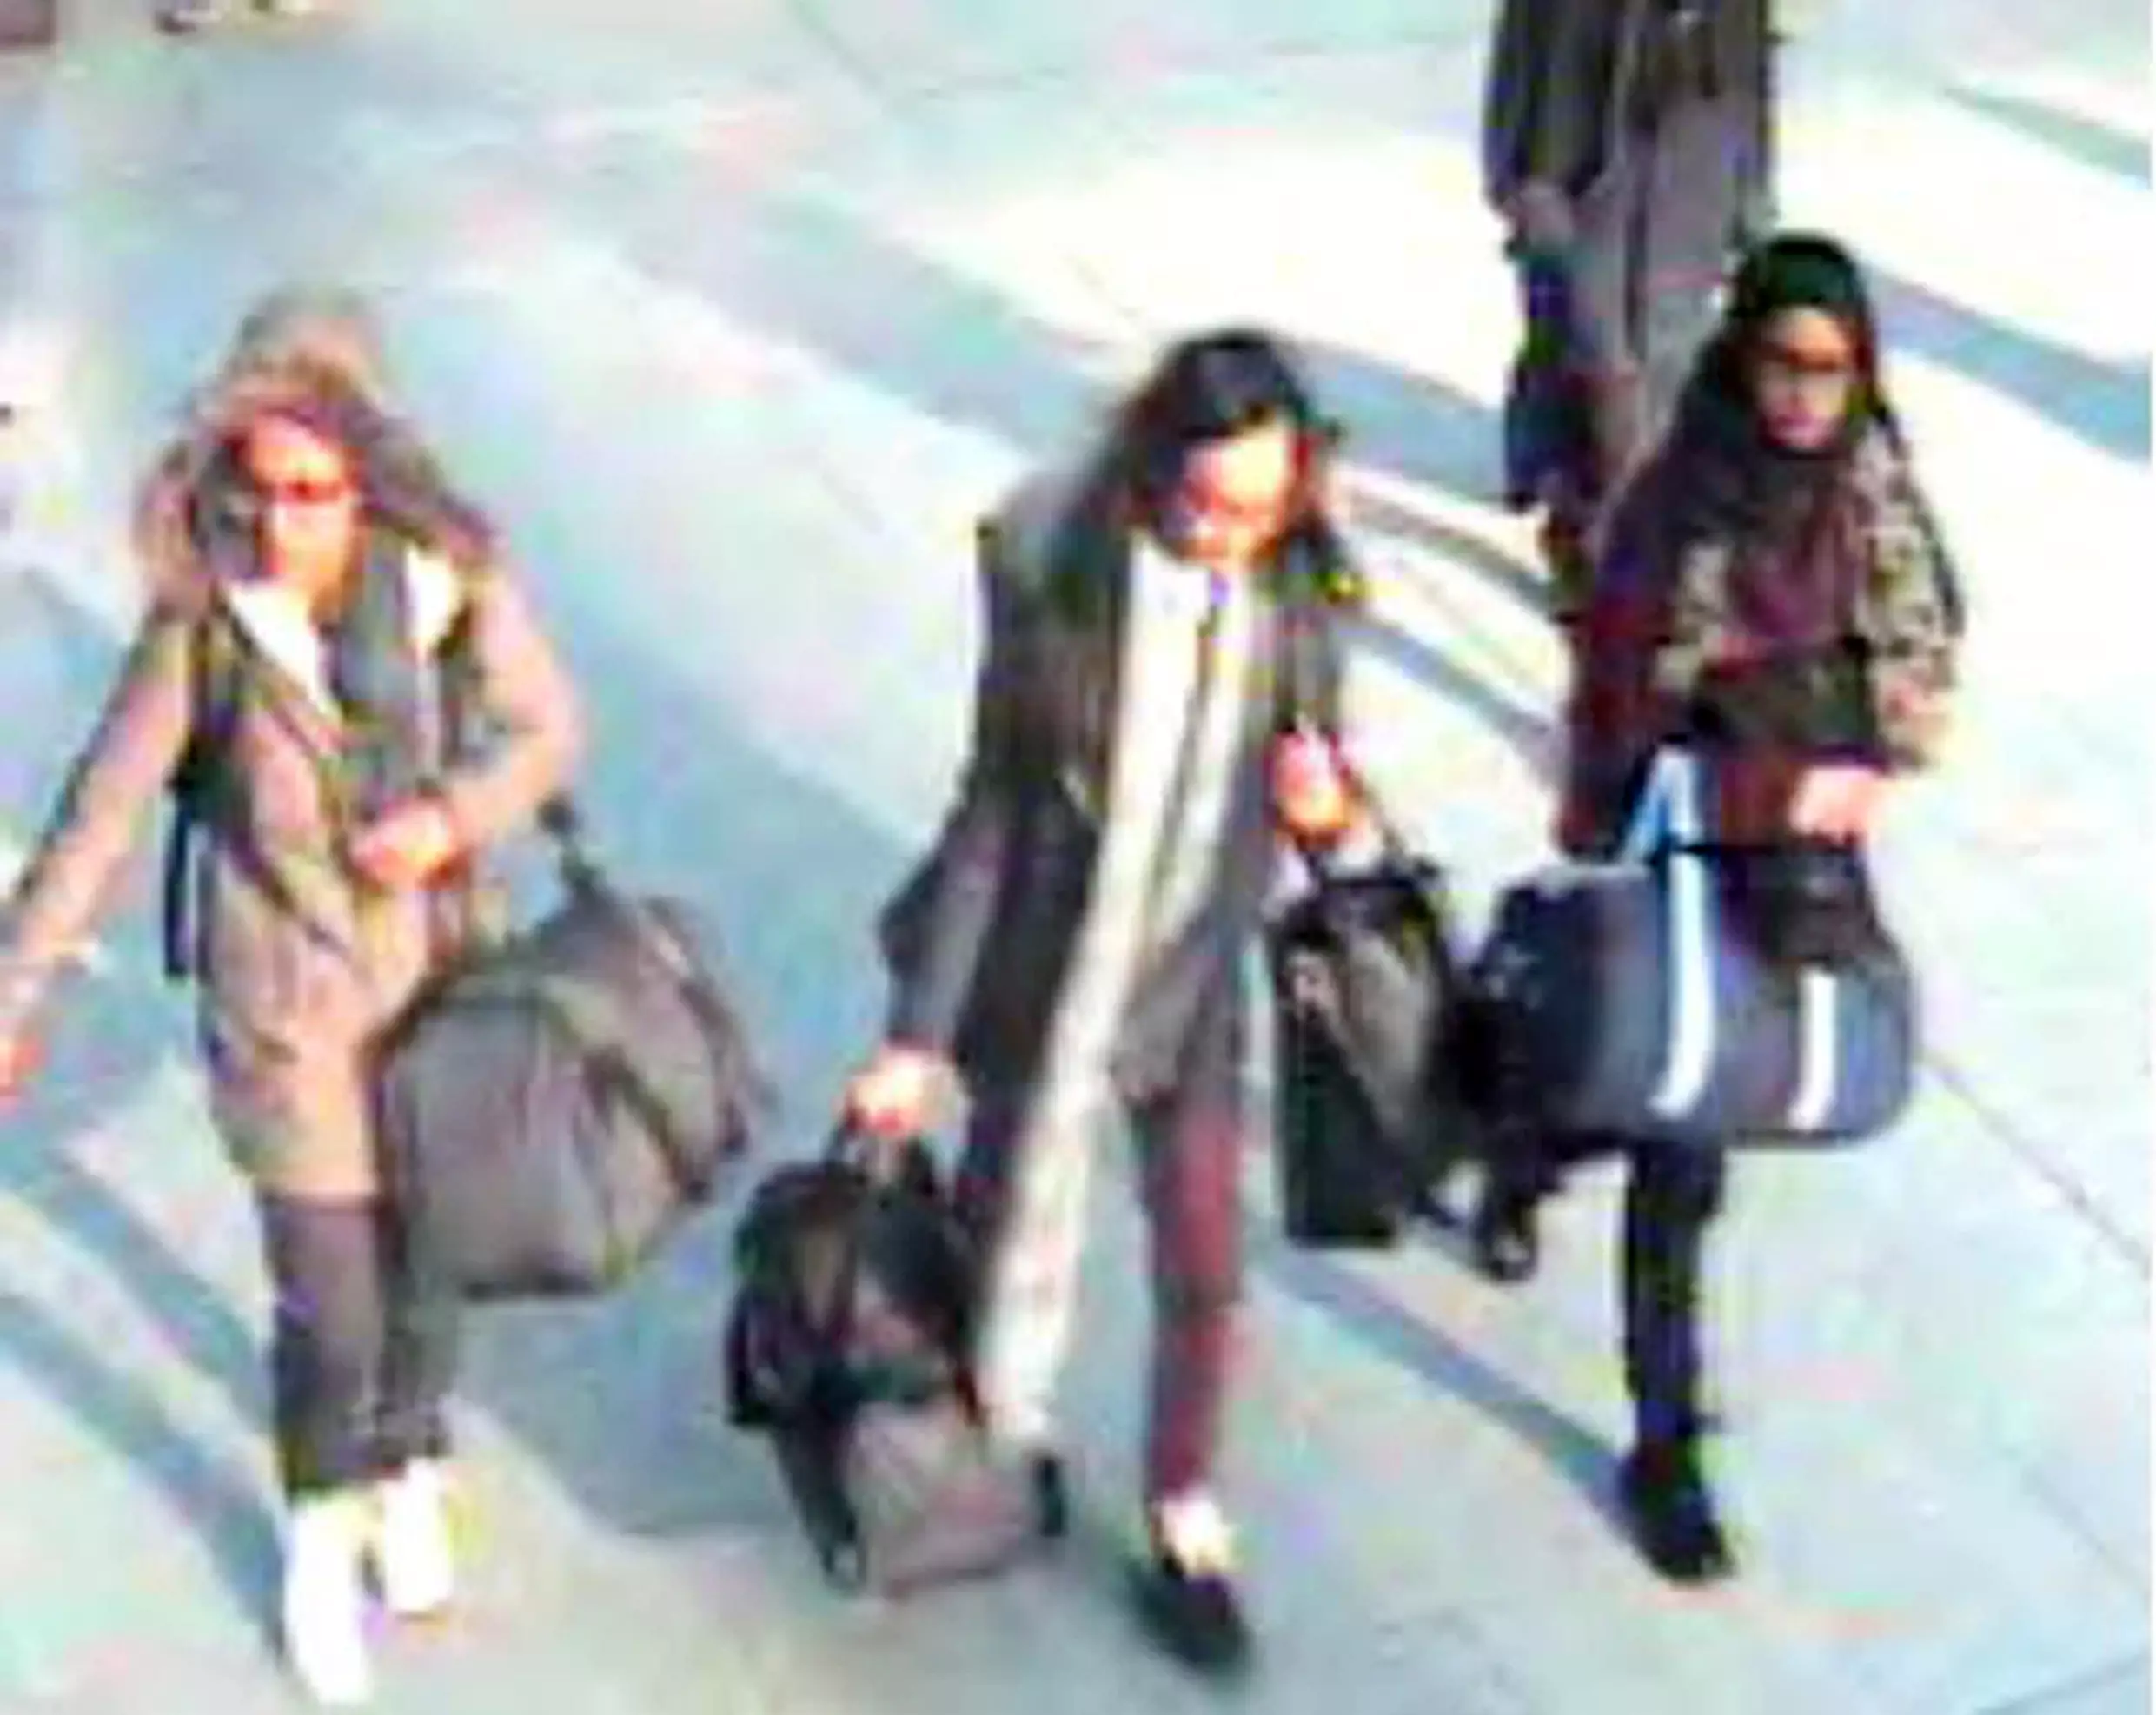 Shamima Begum fled the UK with two others in 2015.